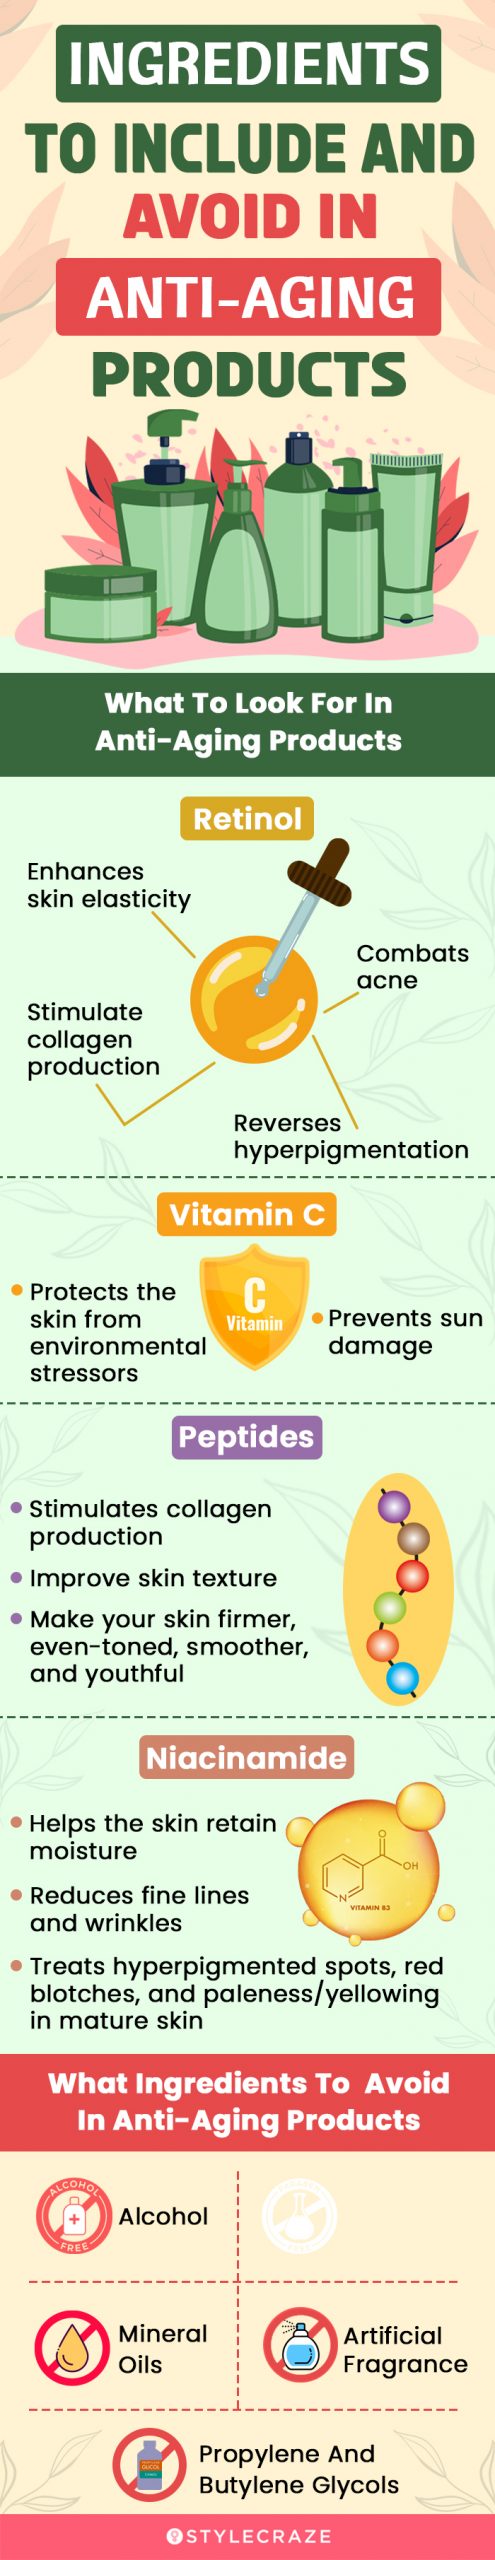 Ingredients To Include And Avoid In Anti-Aging Products [infographic]